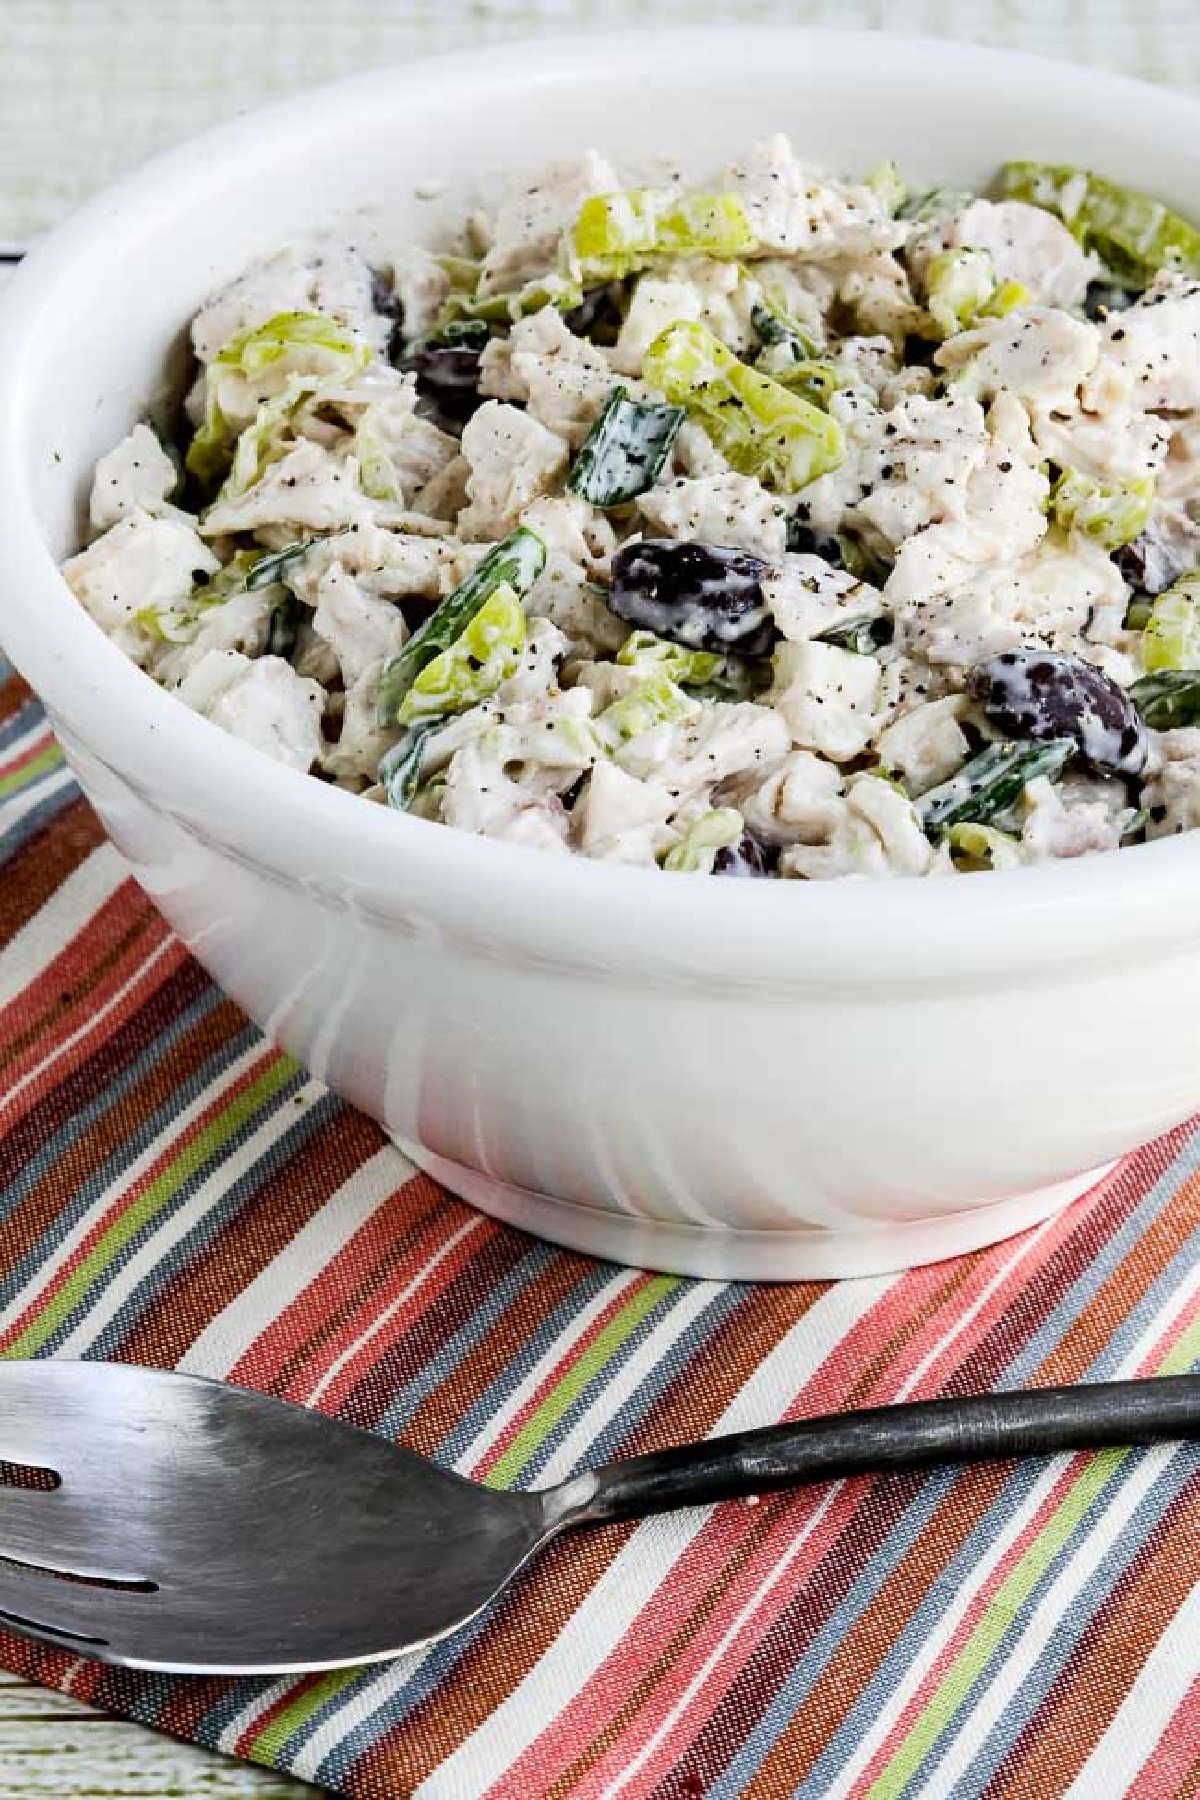 Greek Chicken Salad with Peperoncini shown in serving bowl in striped napkin